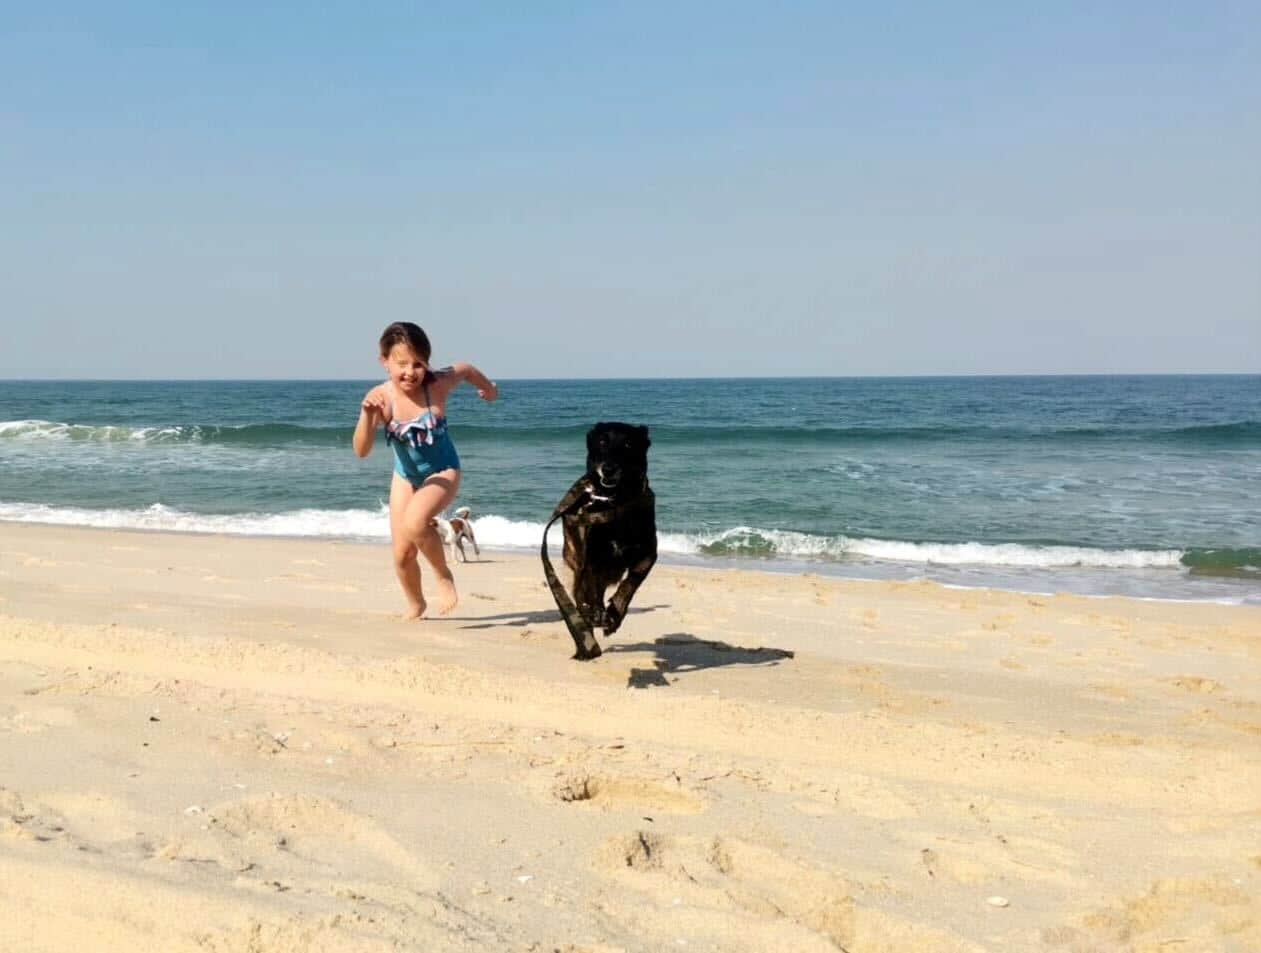 Aria and her new handler running on the beach